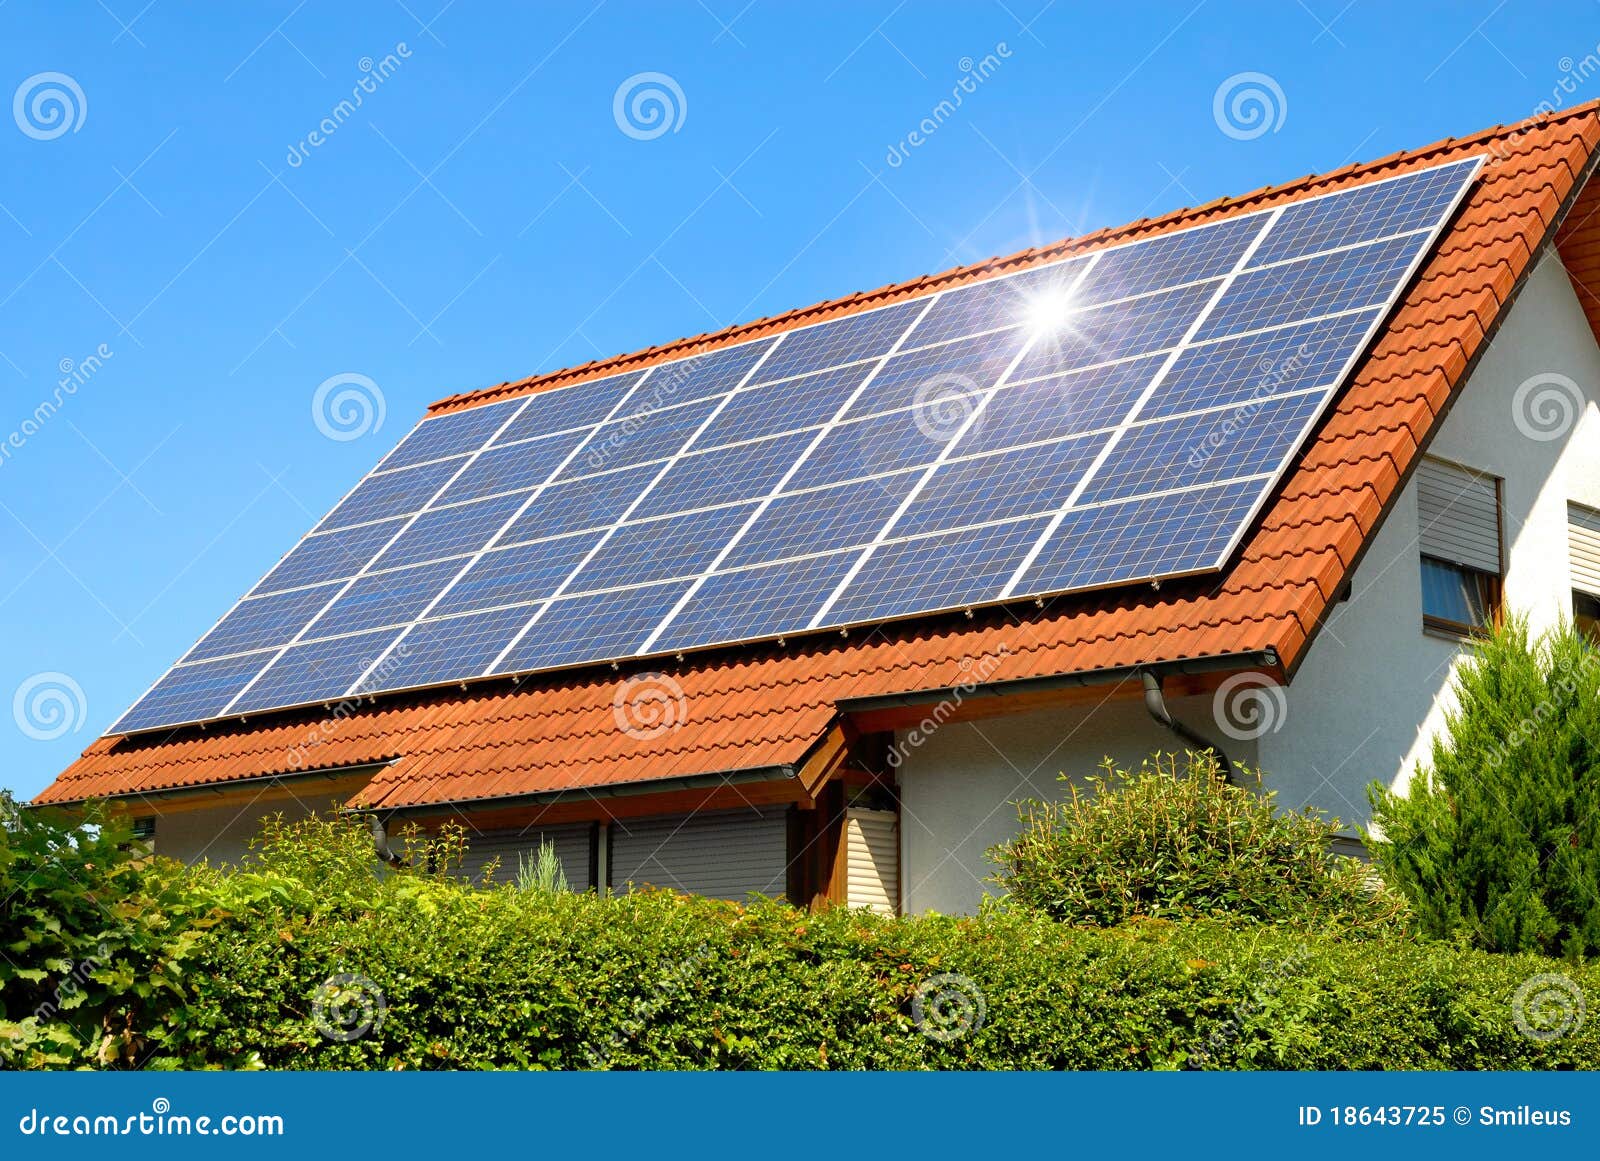 solar panel on a red roof